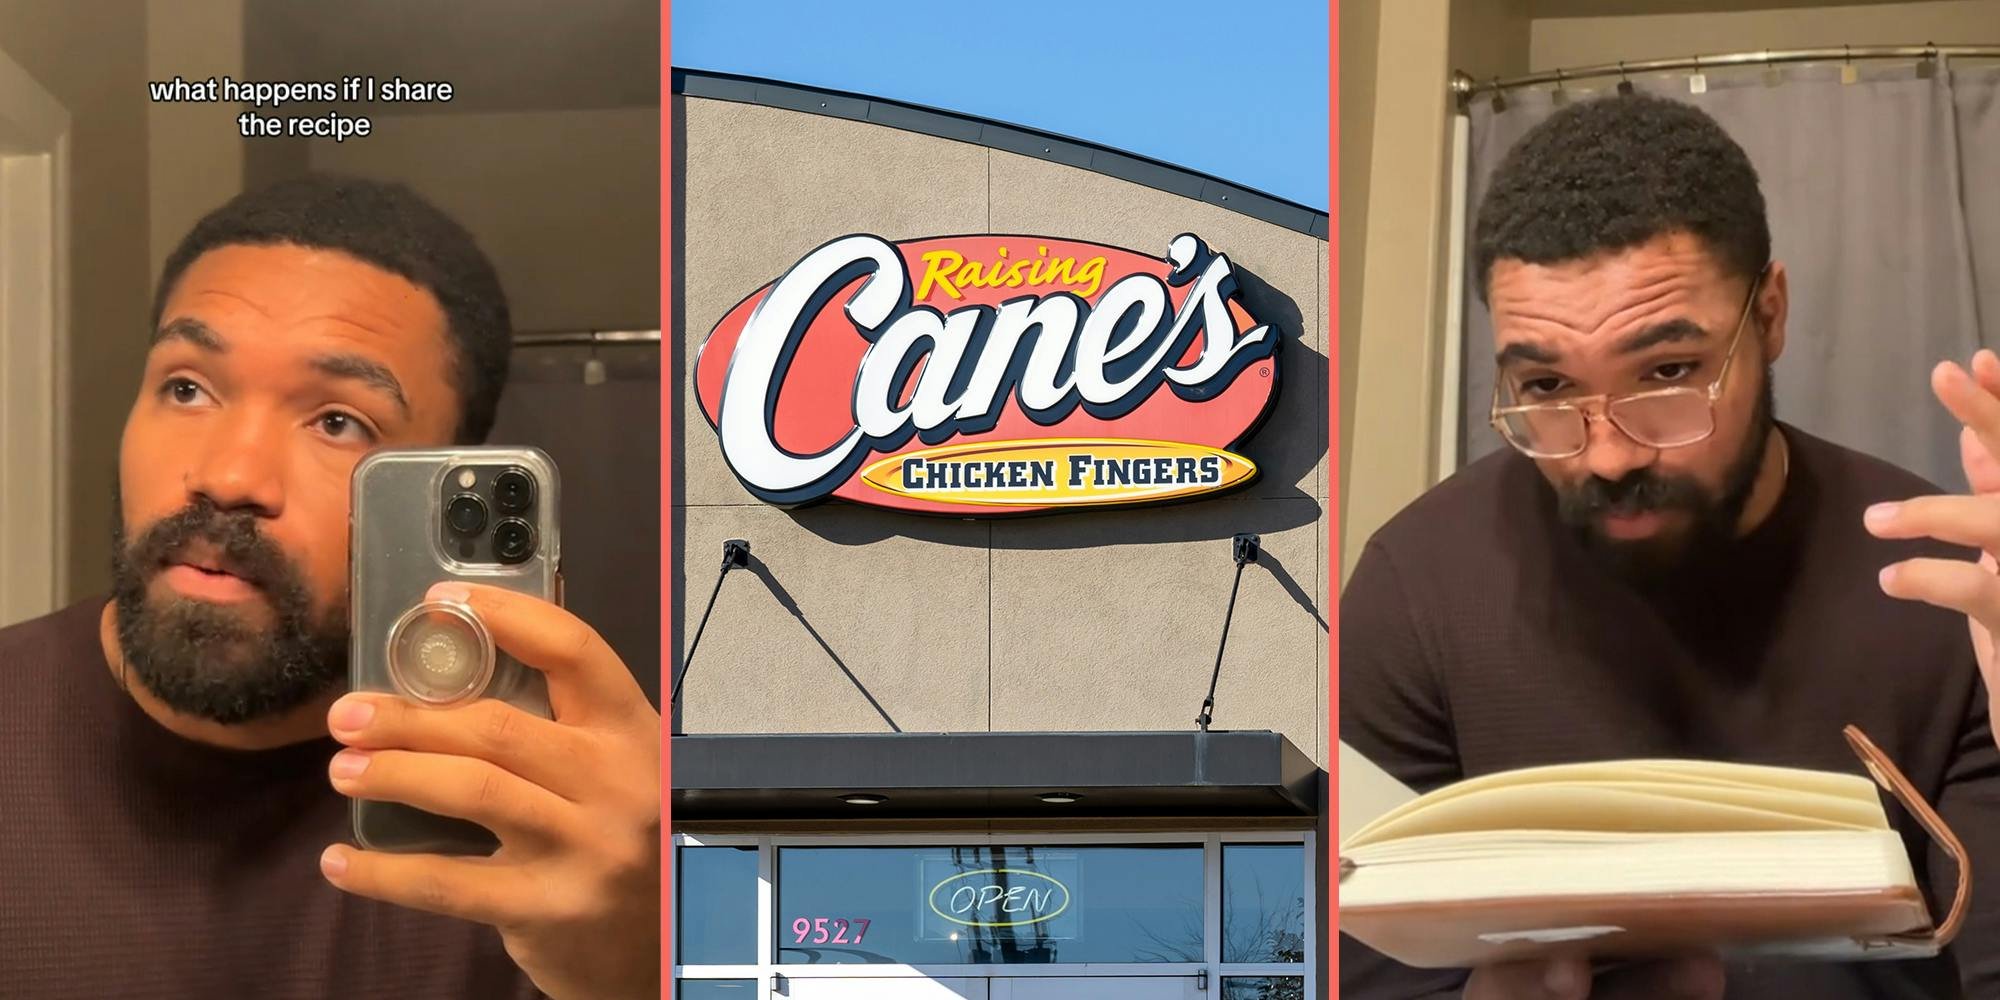 ‘I know you don’t know it and even if you did, keep it to yourself’: Fast-food expert reveals Raising Cane's secret sauce recipe